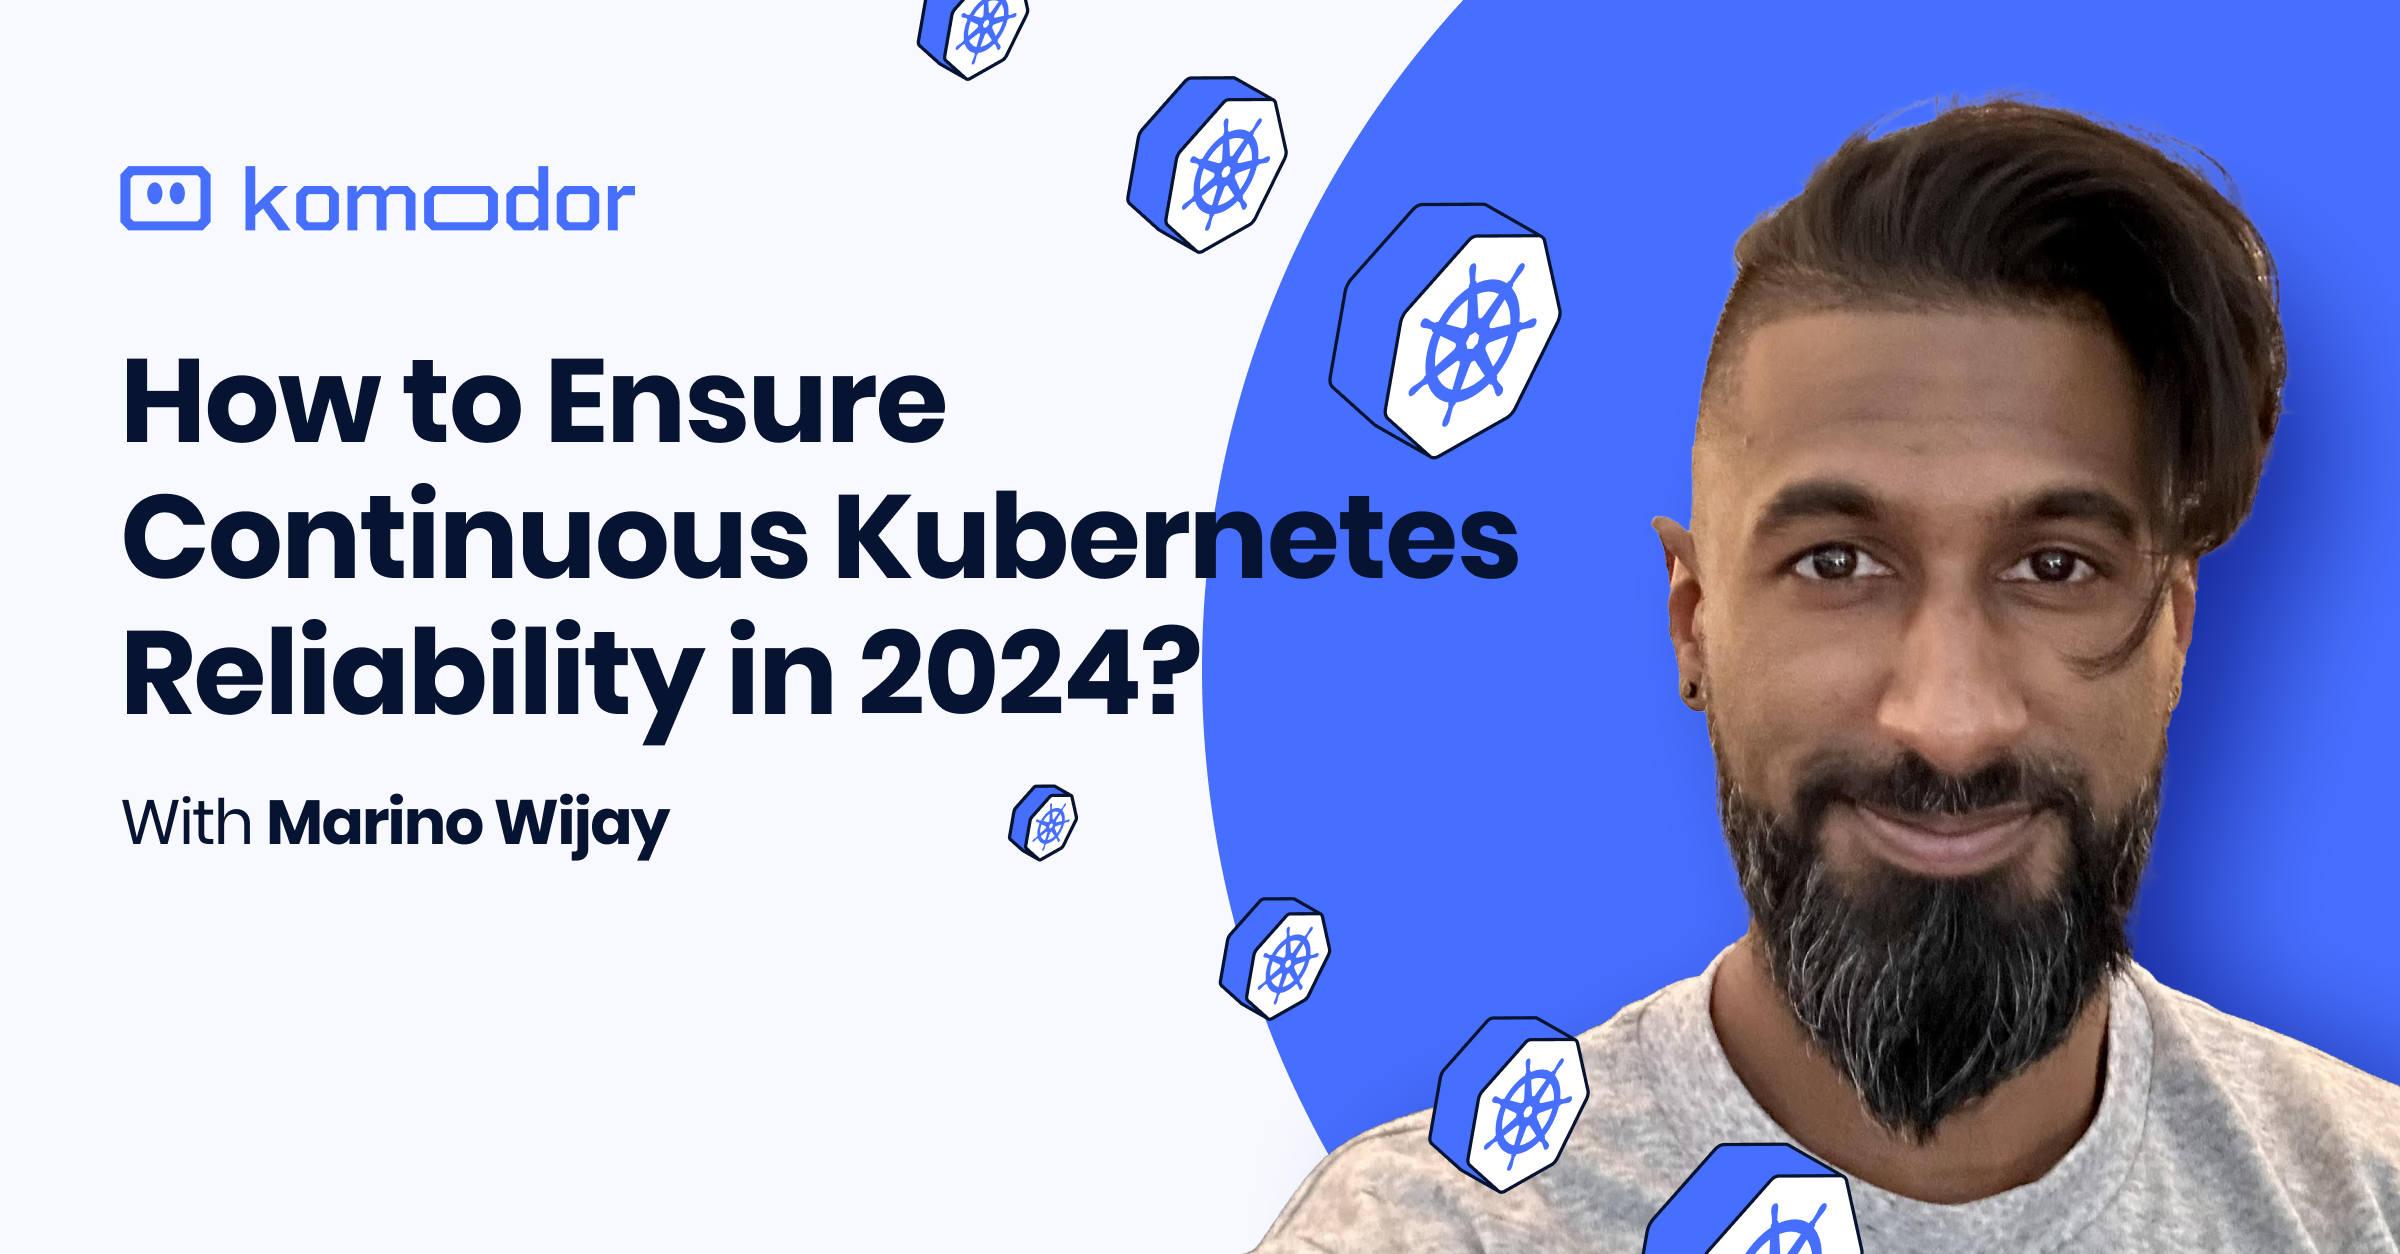 How to Ensure Continuous Kubernetes Reliability in 2024?